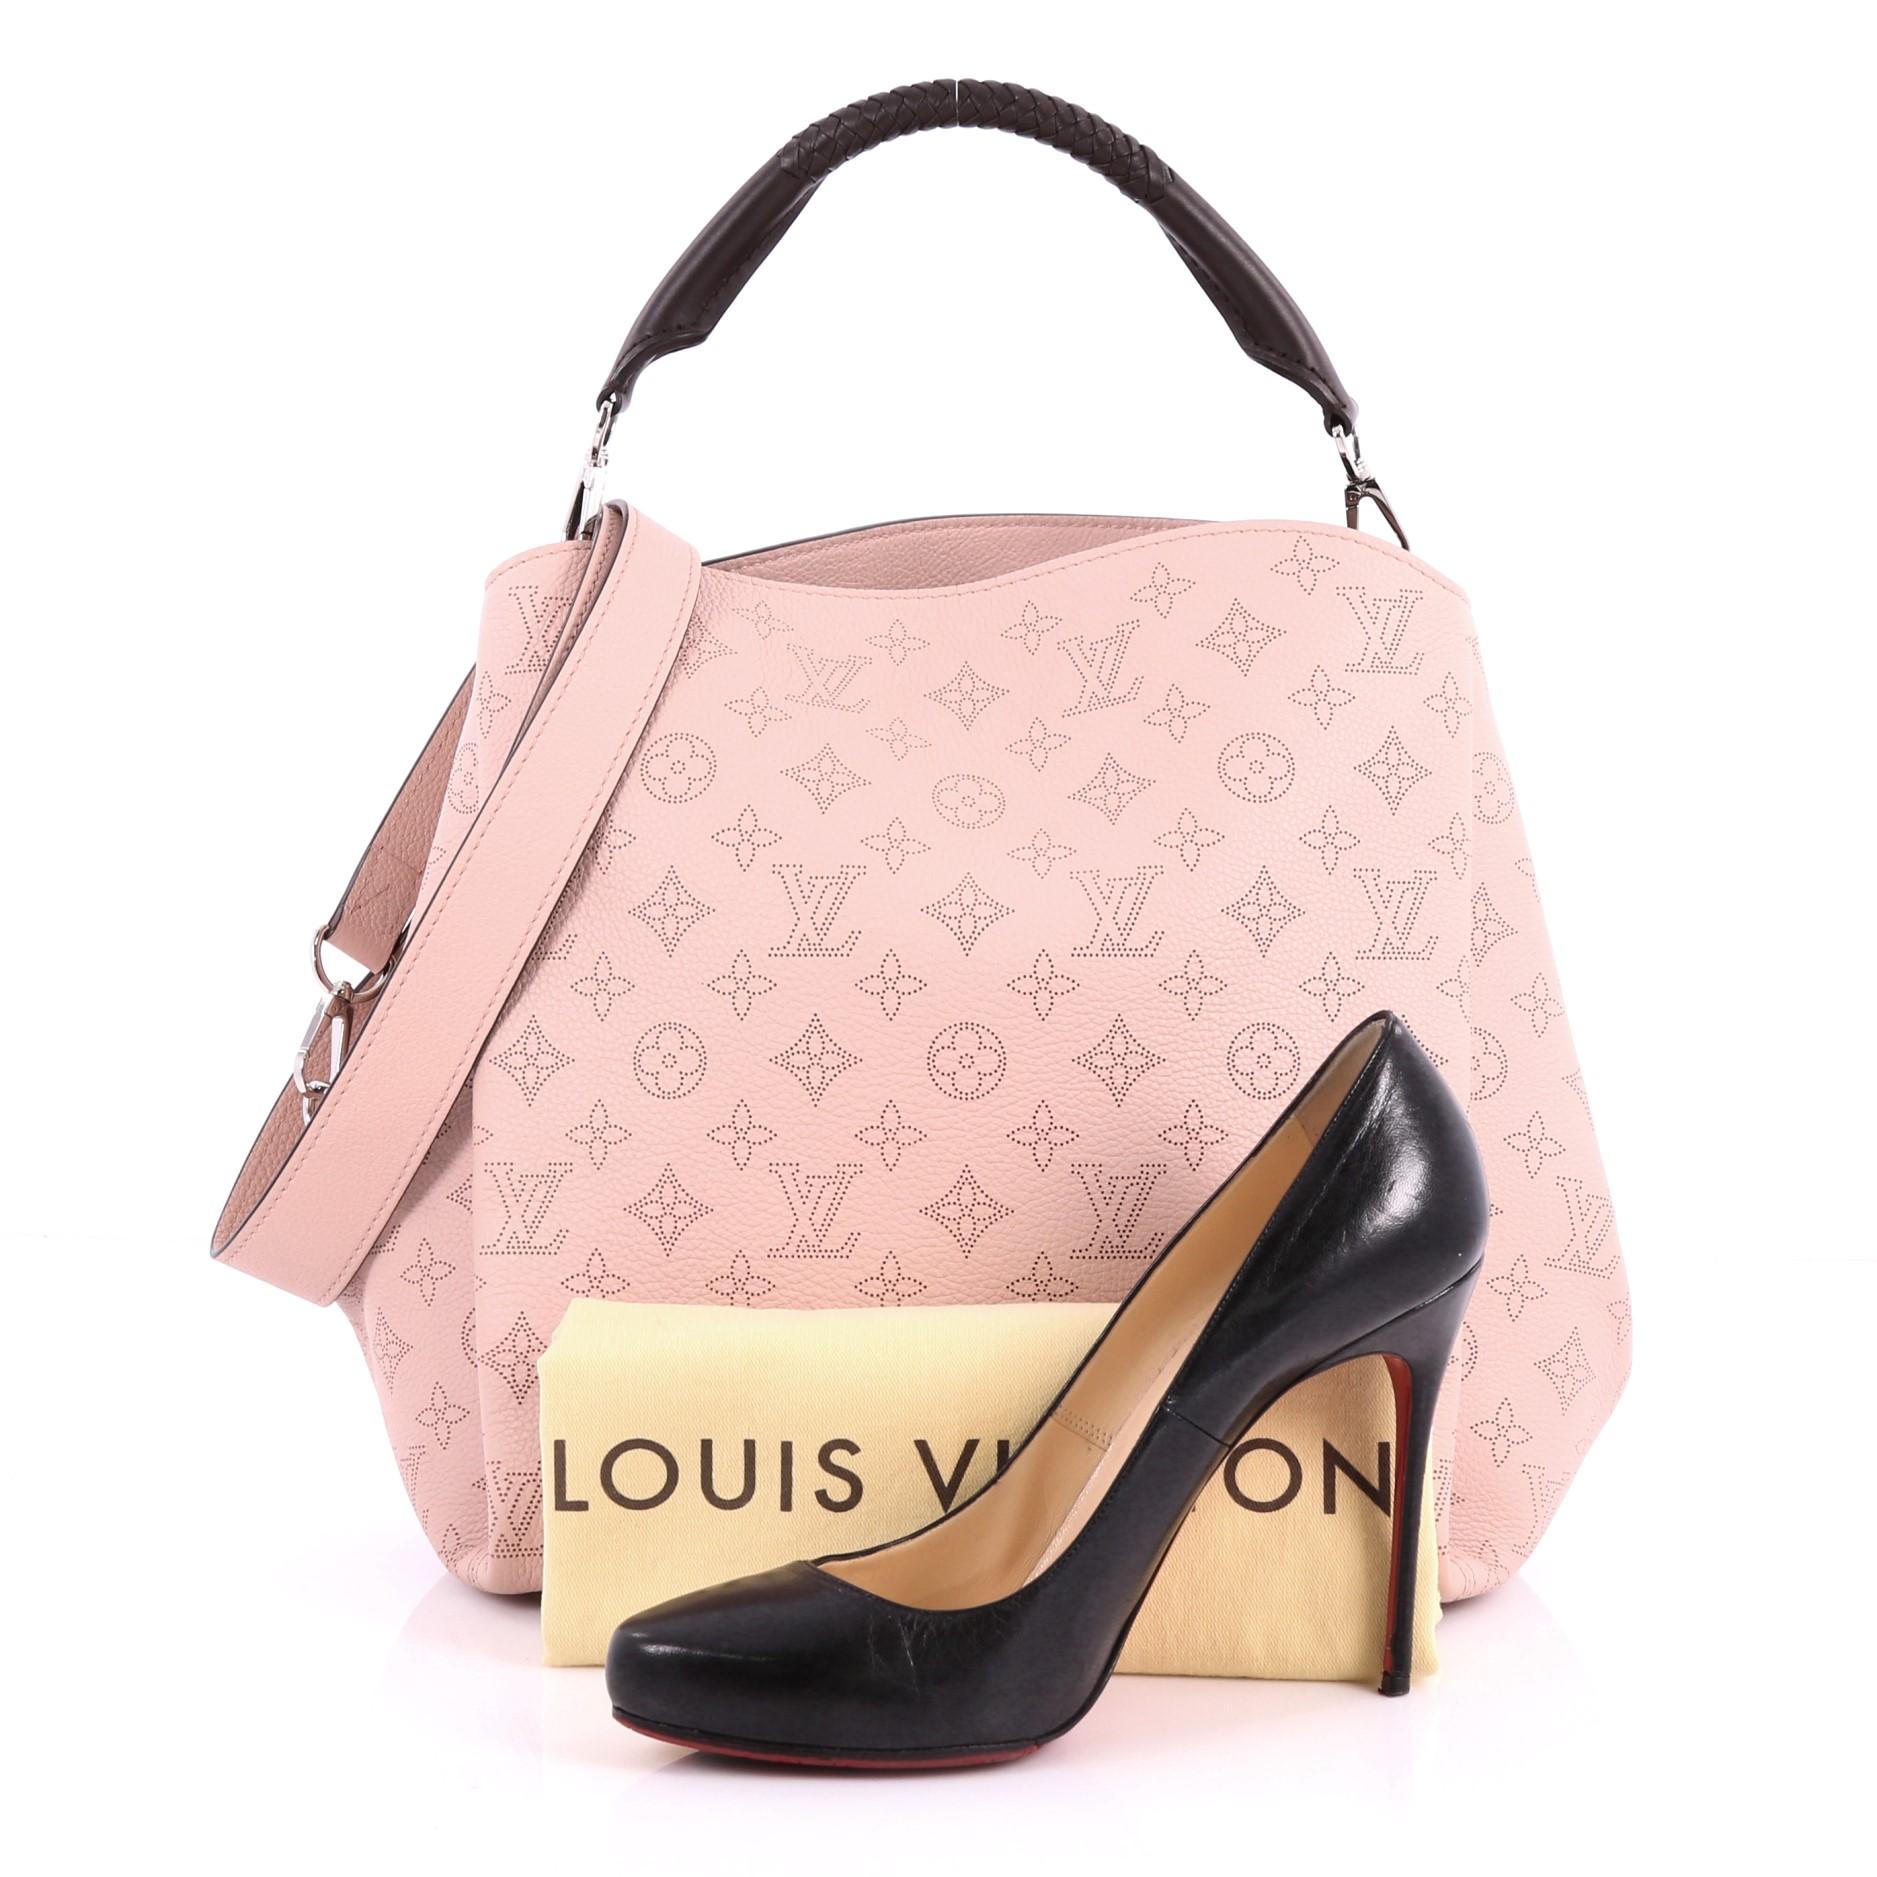 Louis Vuitton - Authenticated Babylone Handbag - Leather Pink Plain For Woman, Very Good condition